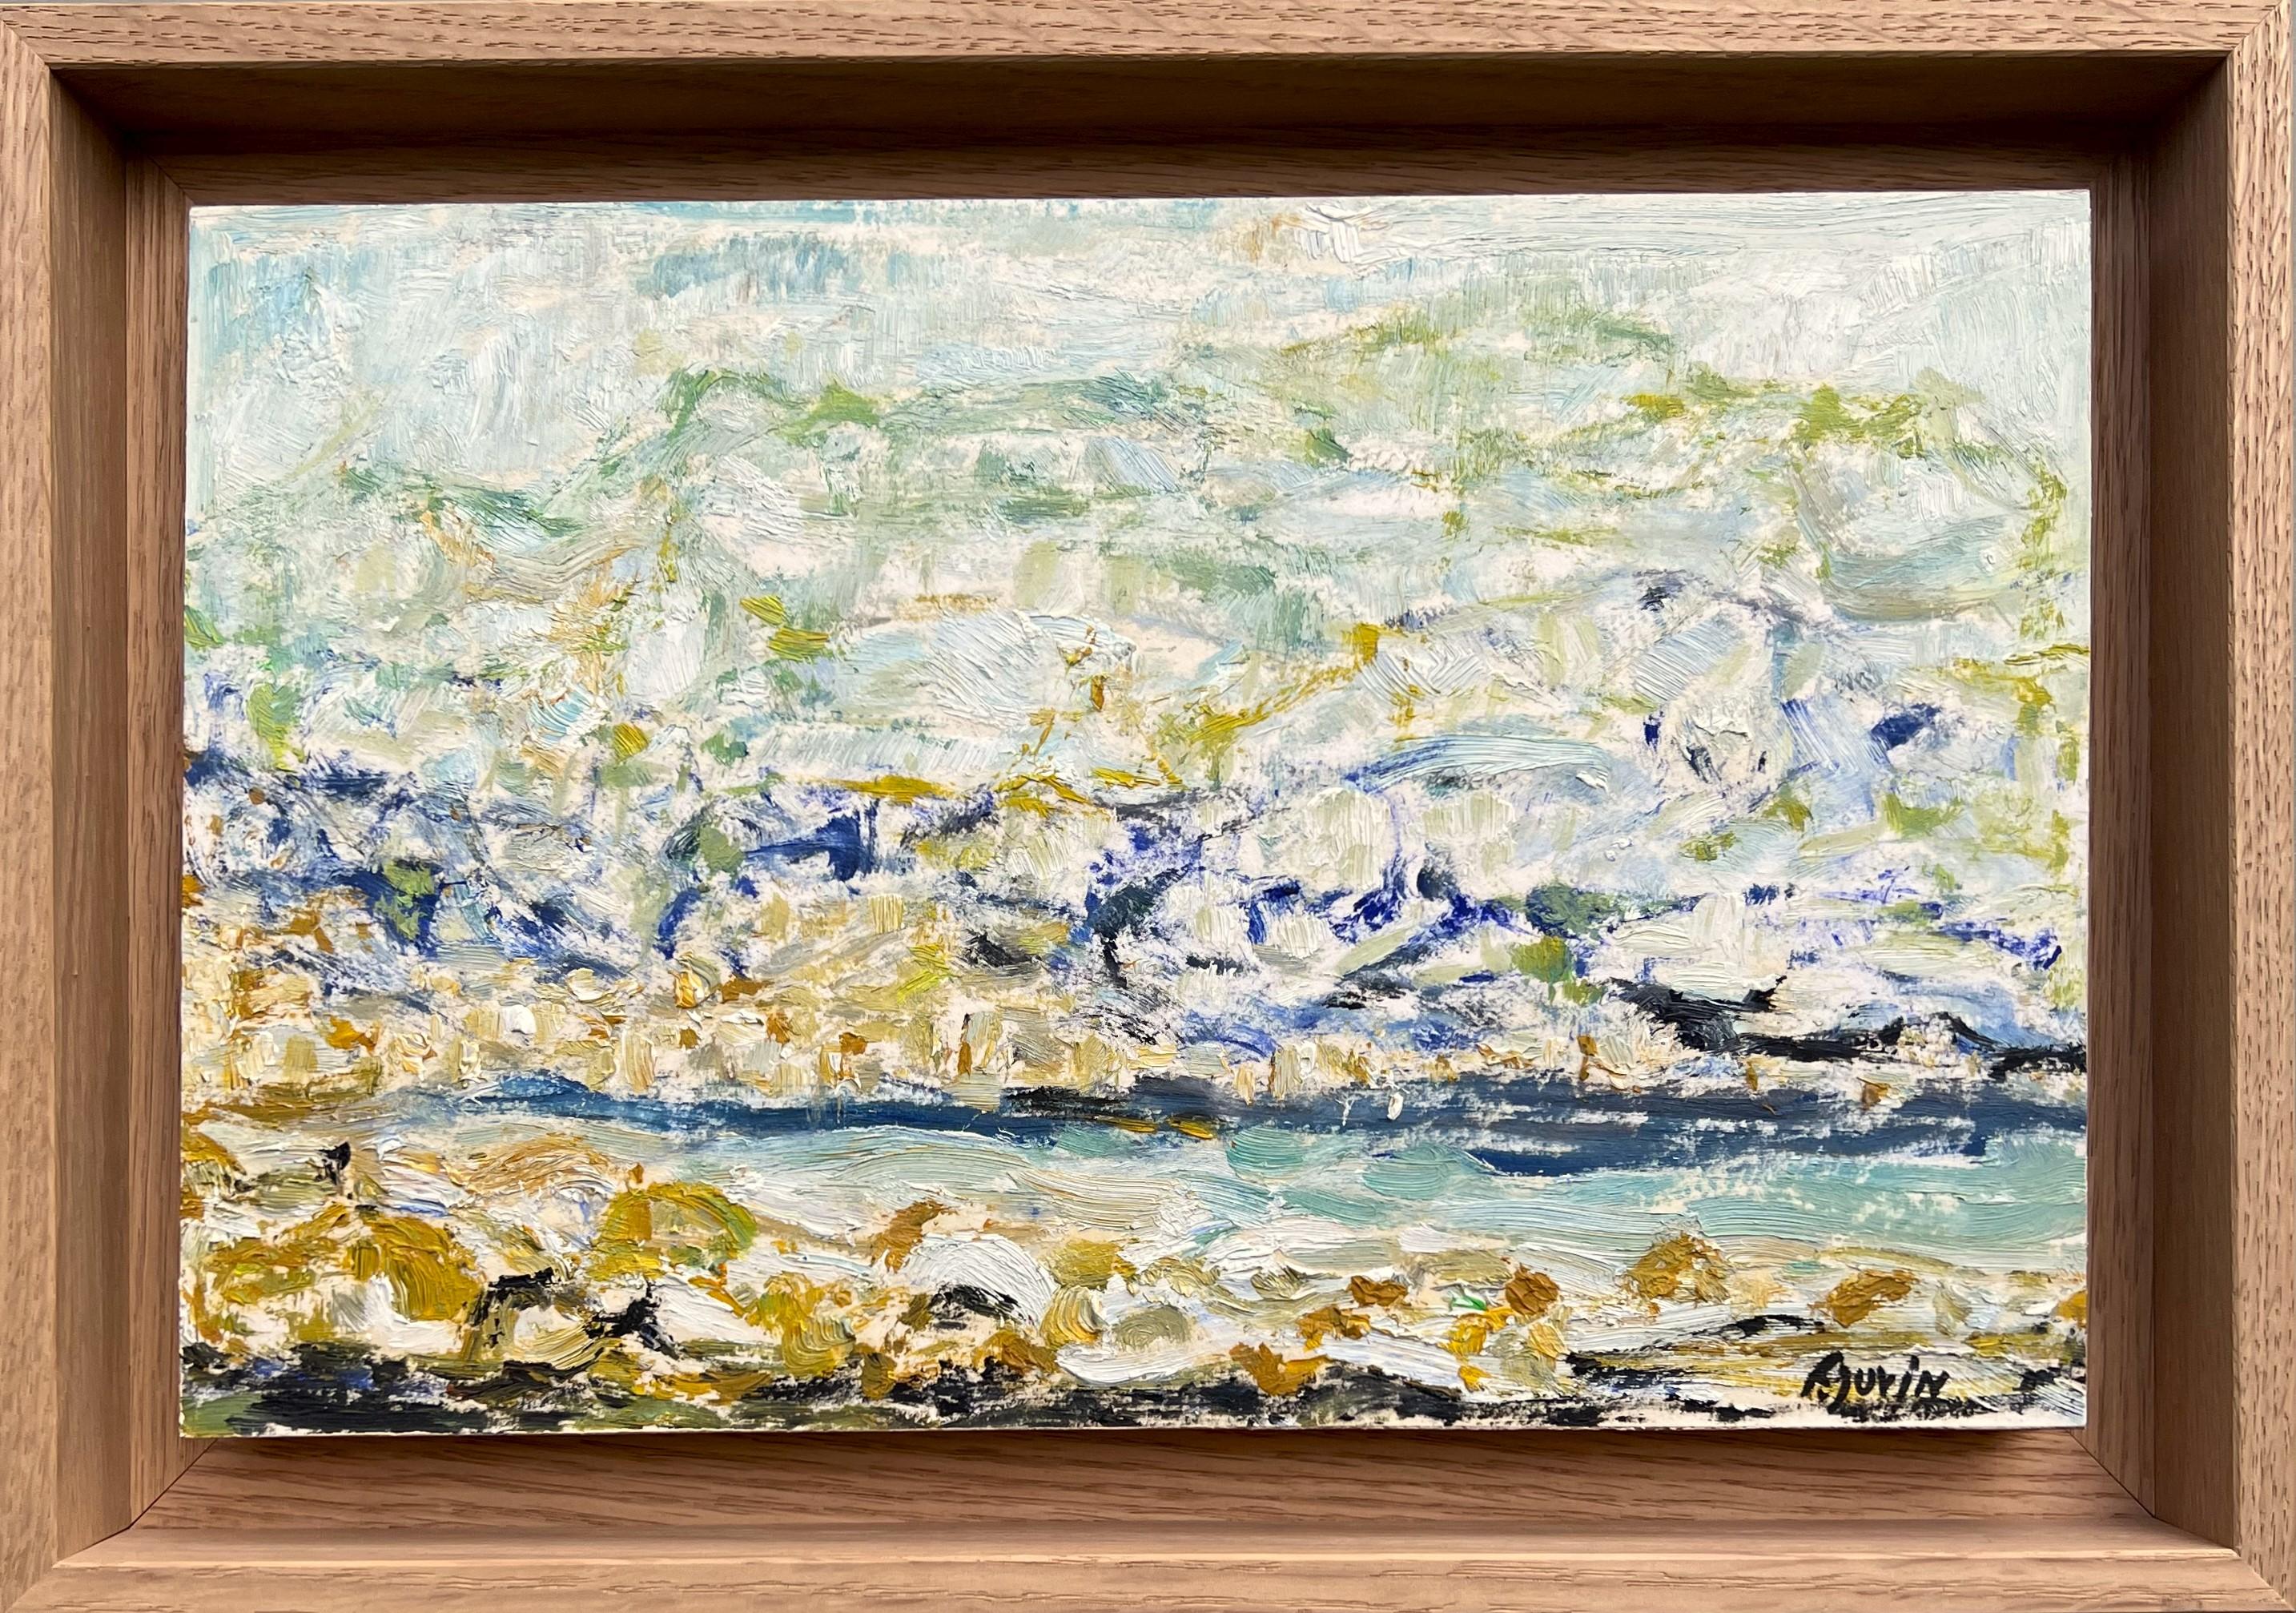 Françoise Juvin - Sea landscape around Cannes
Reference number FJ125
Framed with a natural oak floated frame.
22,5 x 32 cm frame included (17 x 26 cm without frame)
This work is painted with oil on a paper that is mounted on a board and placed in a